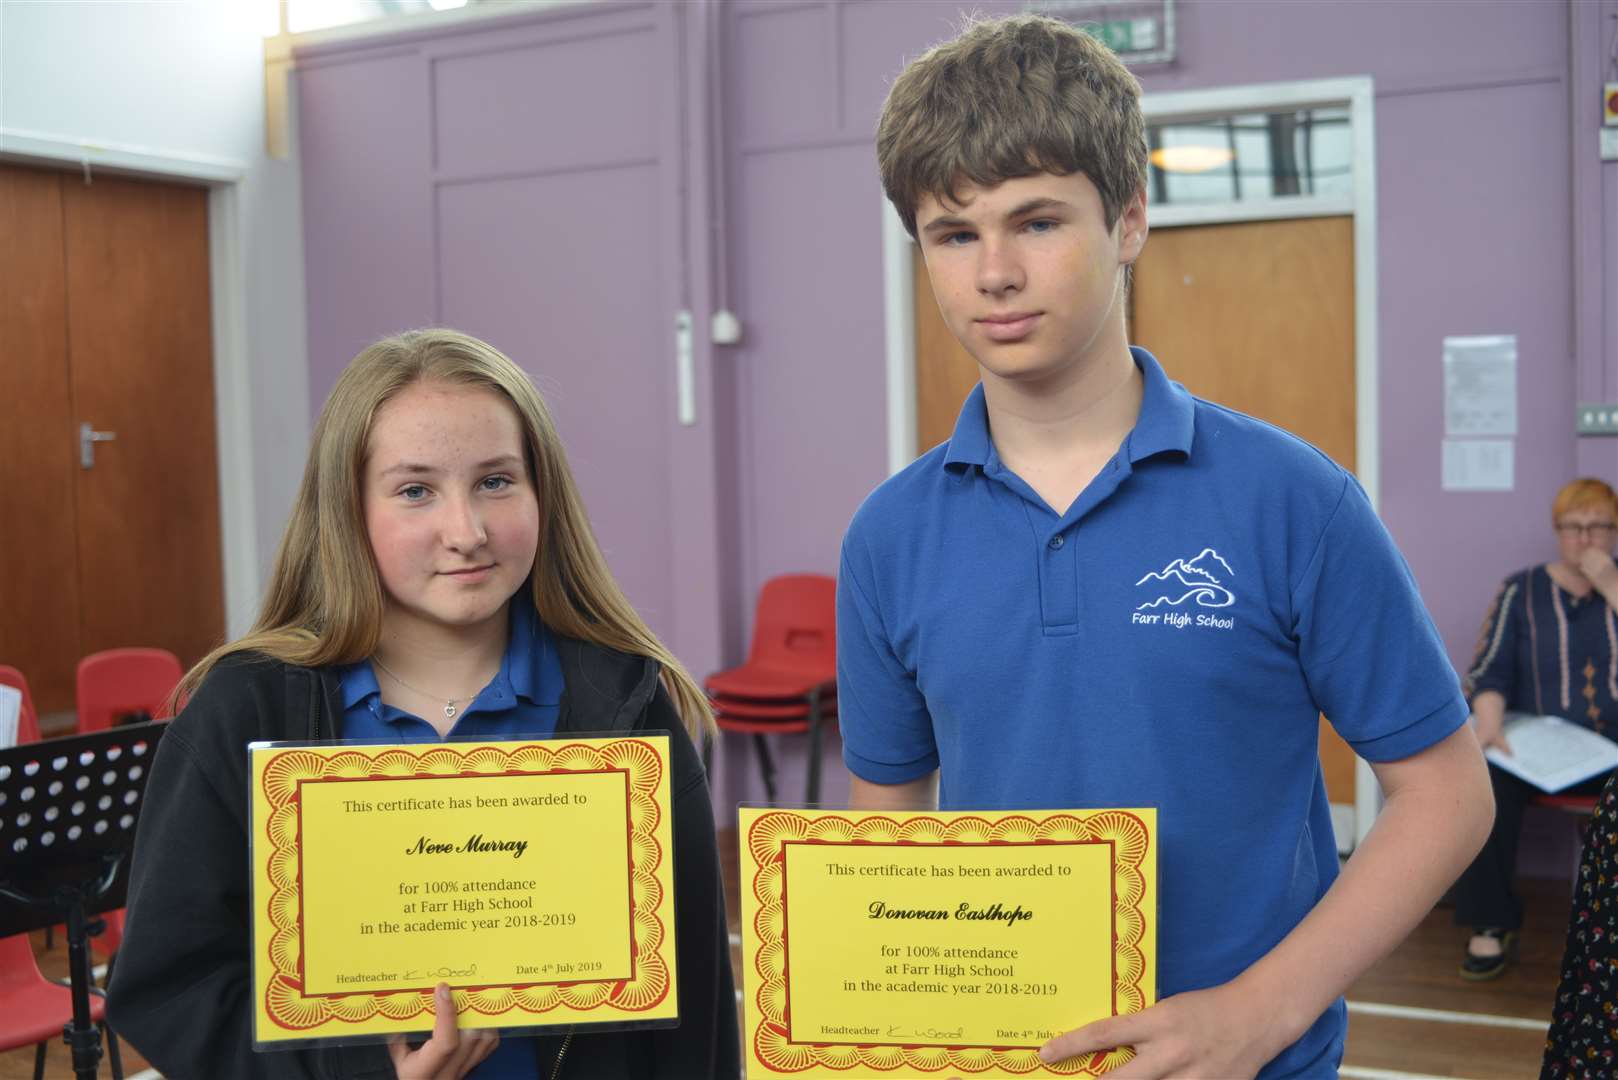 Neve Murray and Donovan Easthope with their certificates of perfect attendance in 2018/19. Pictures: Jim A Johnston